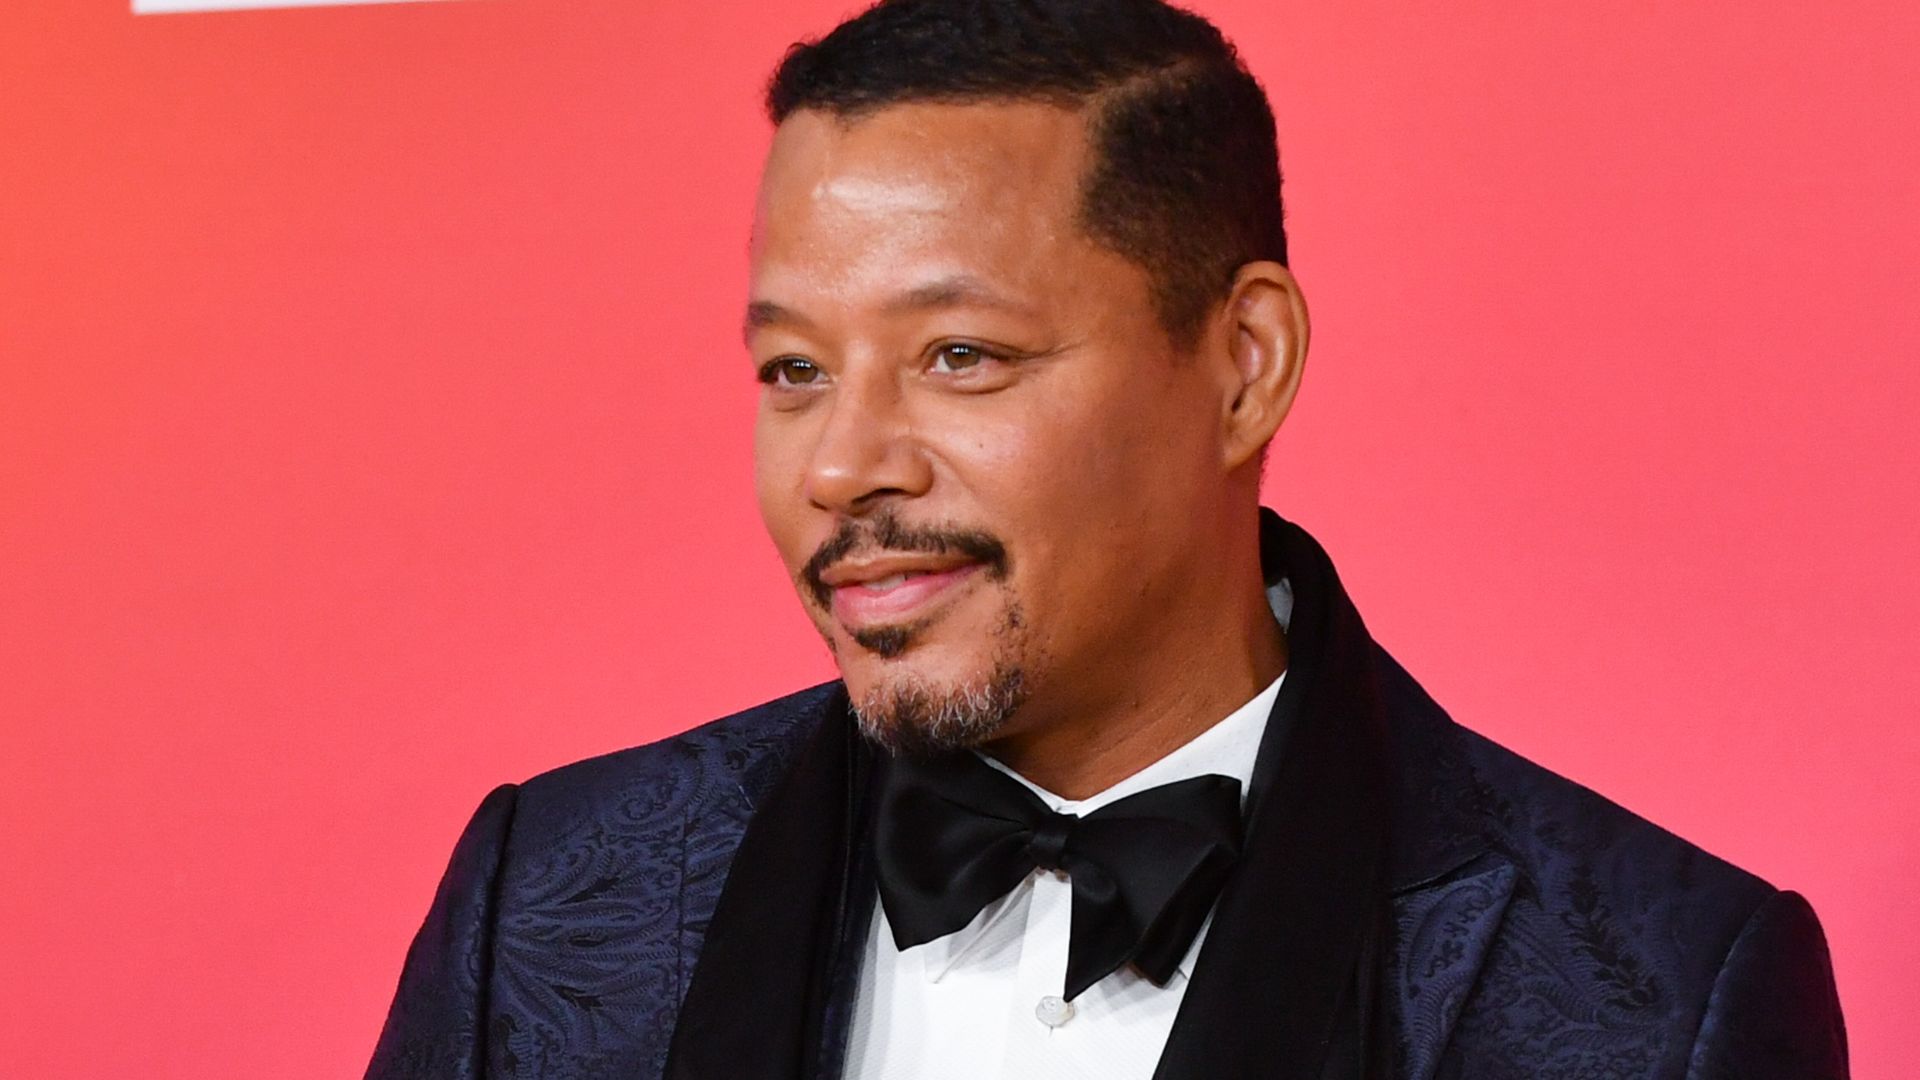 Terrence Howard - Biography